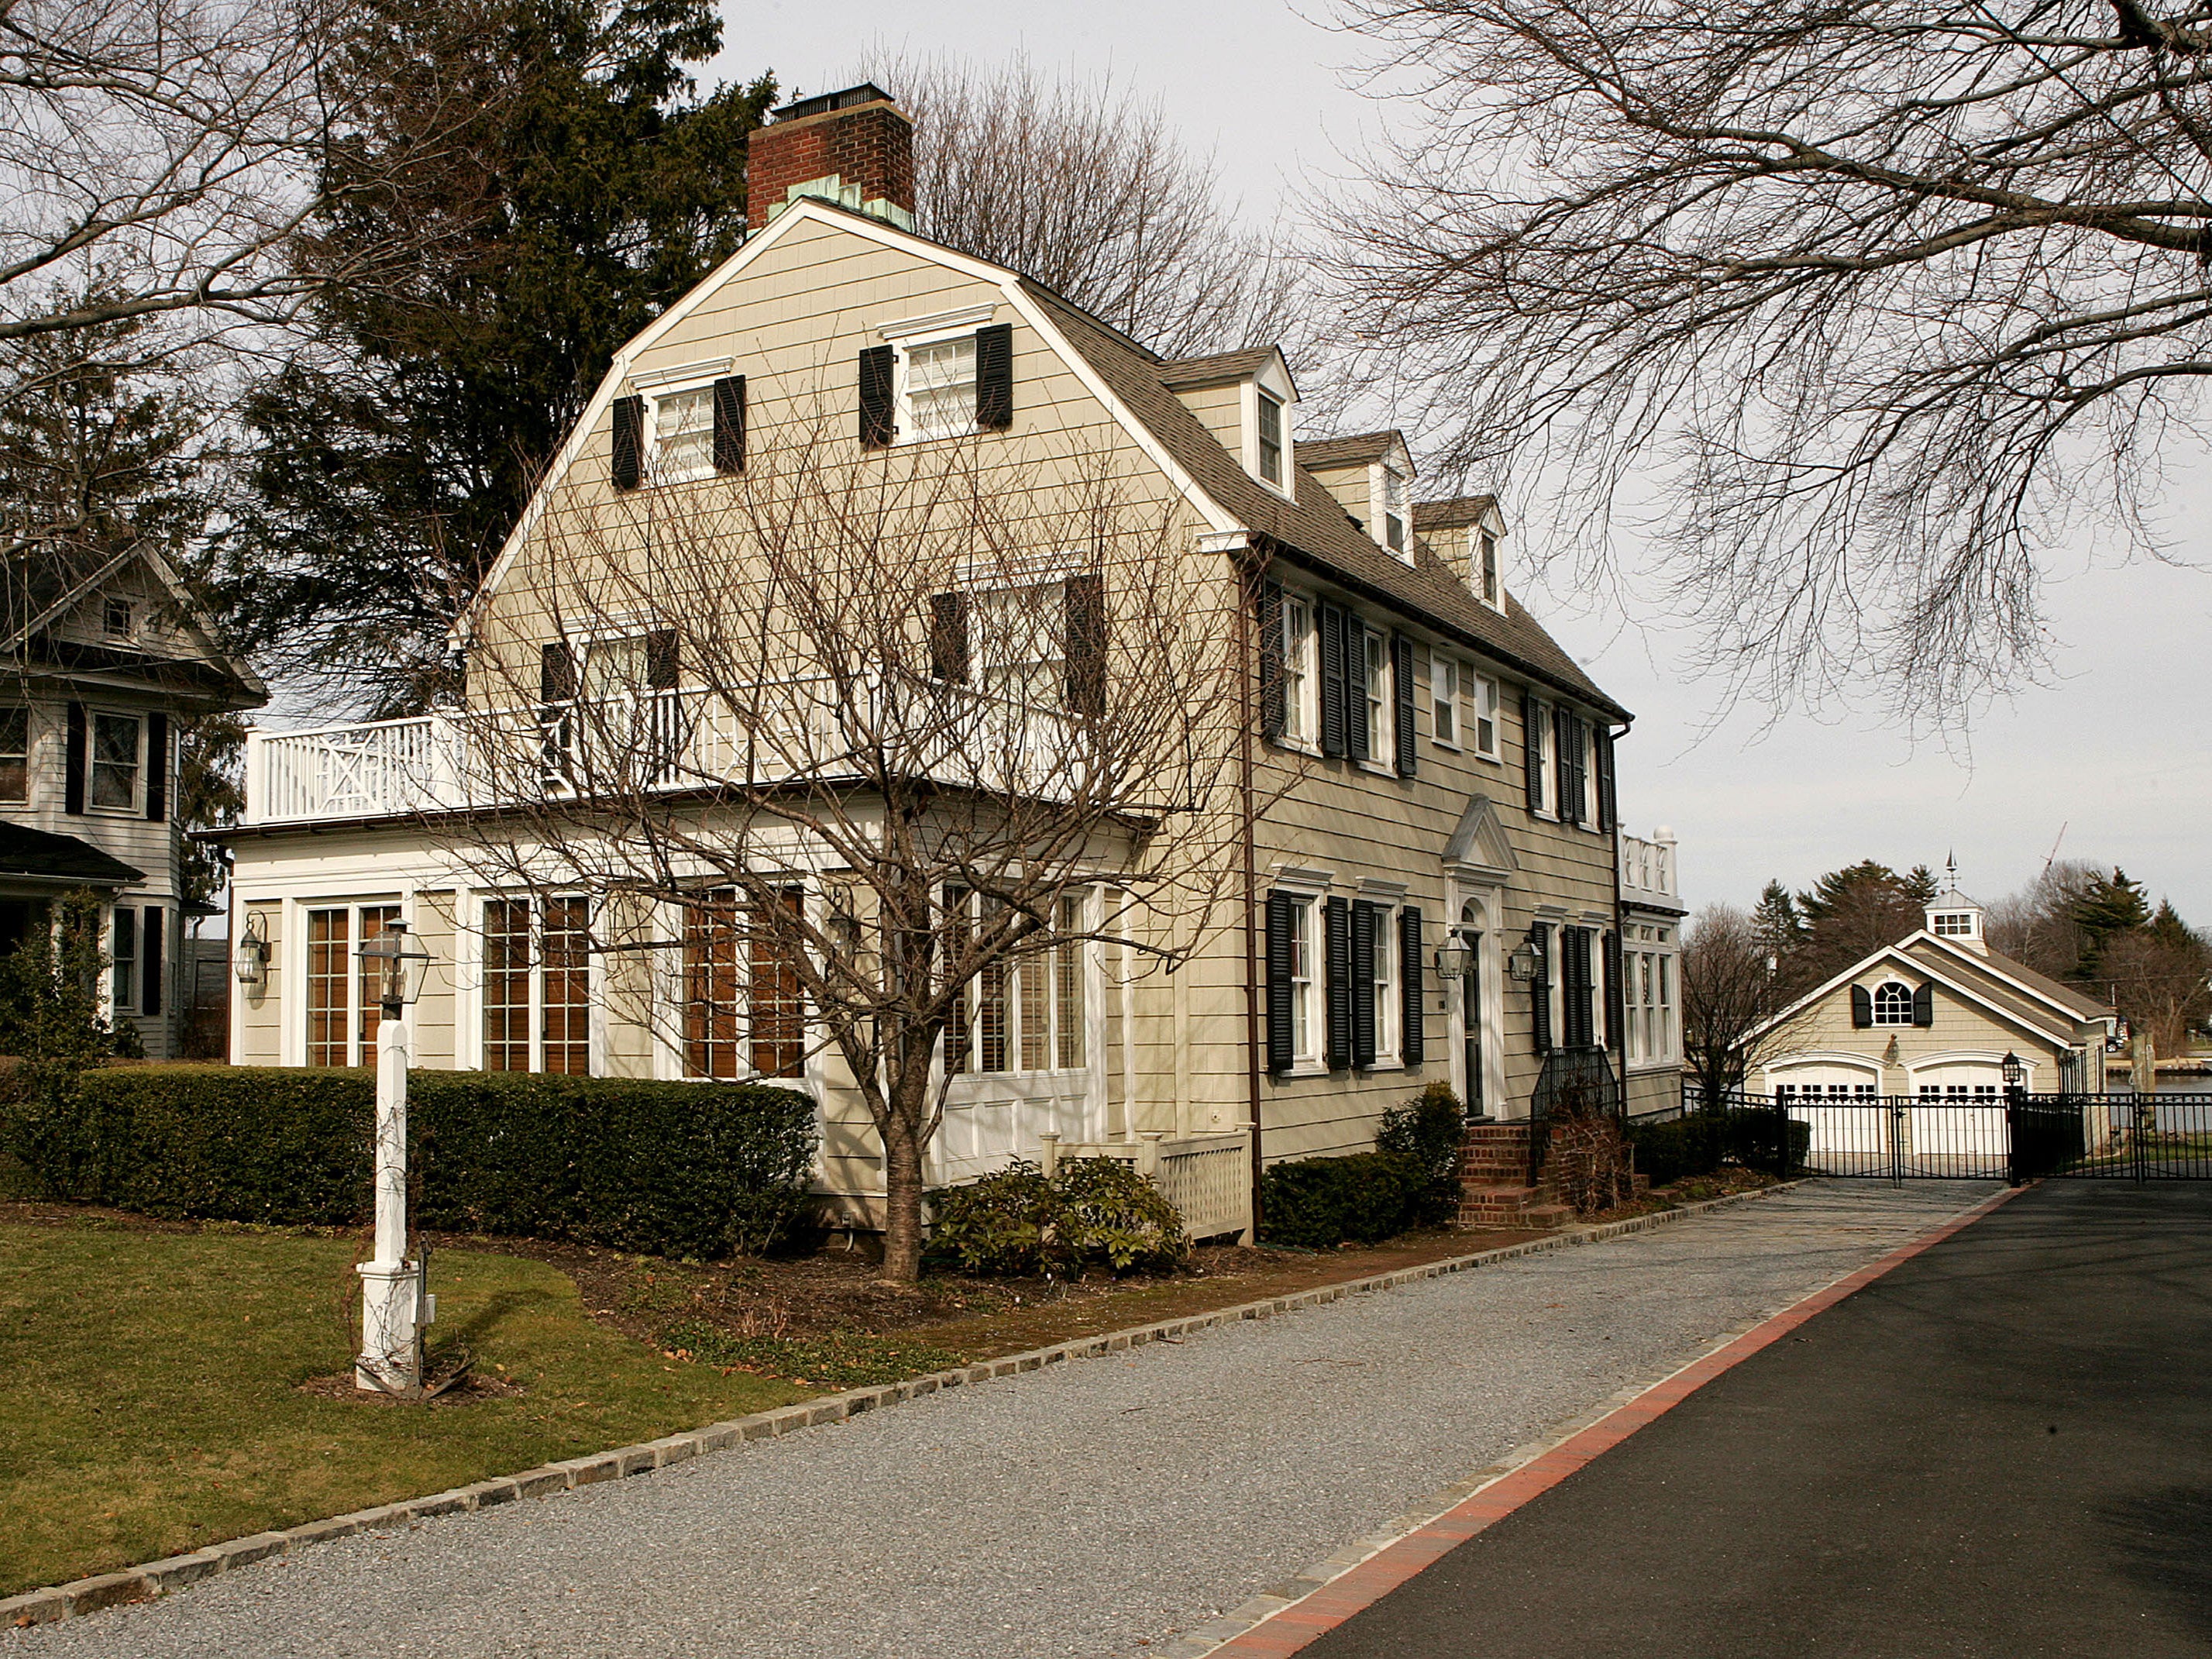 Six members of the DeFeo family were murdered at 112 Ocean Avenue in 1974 their tragedy haunts the citizens of Amityville to this day